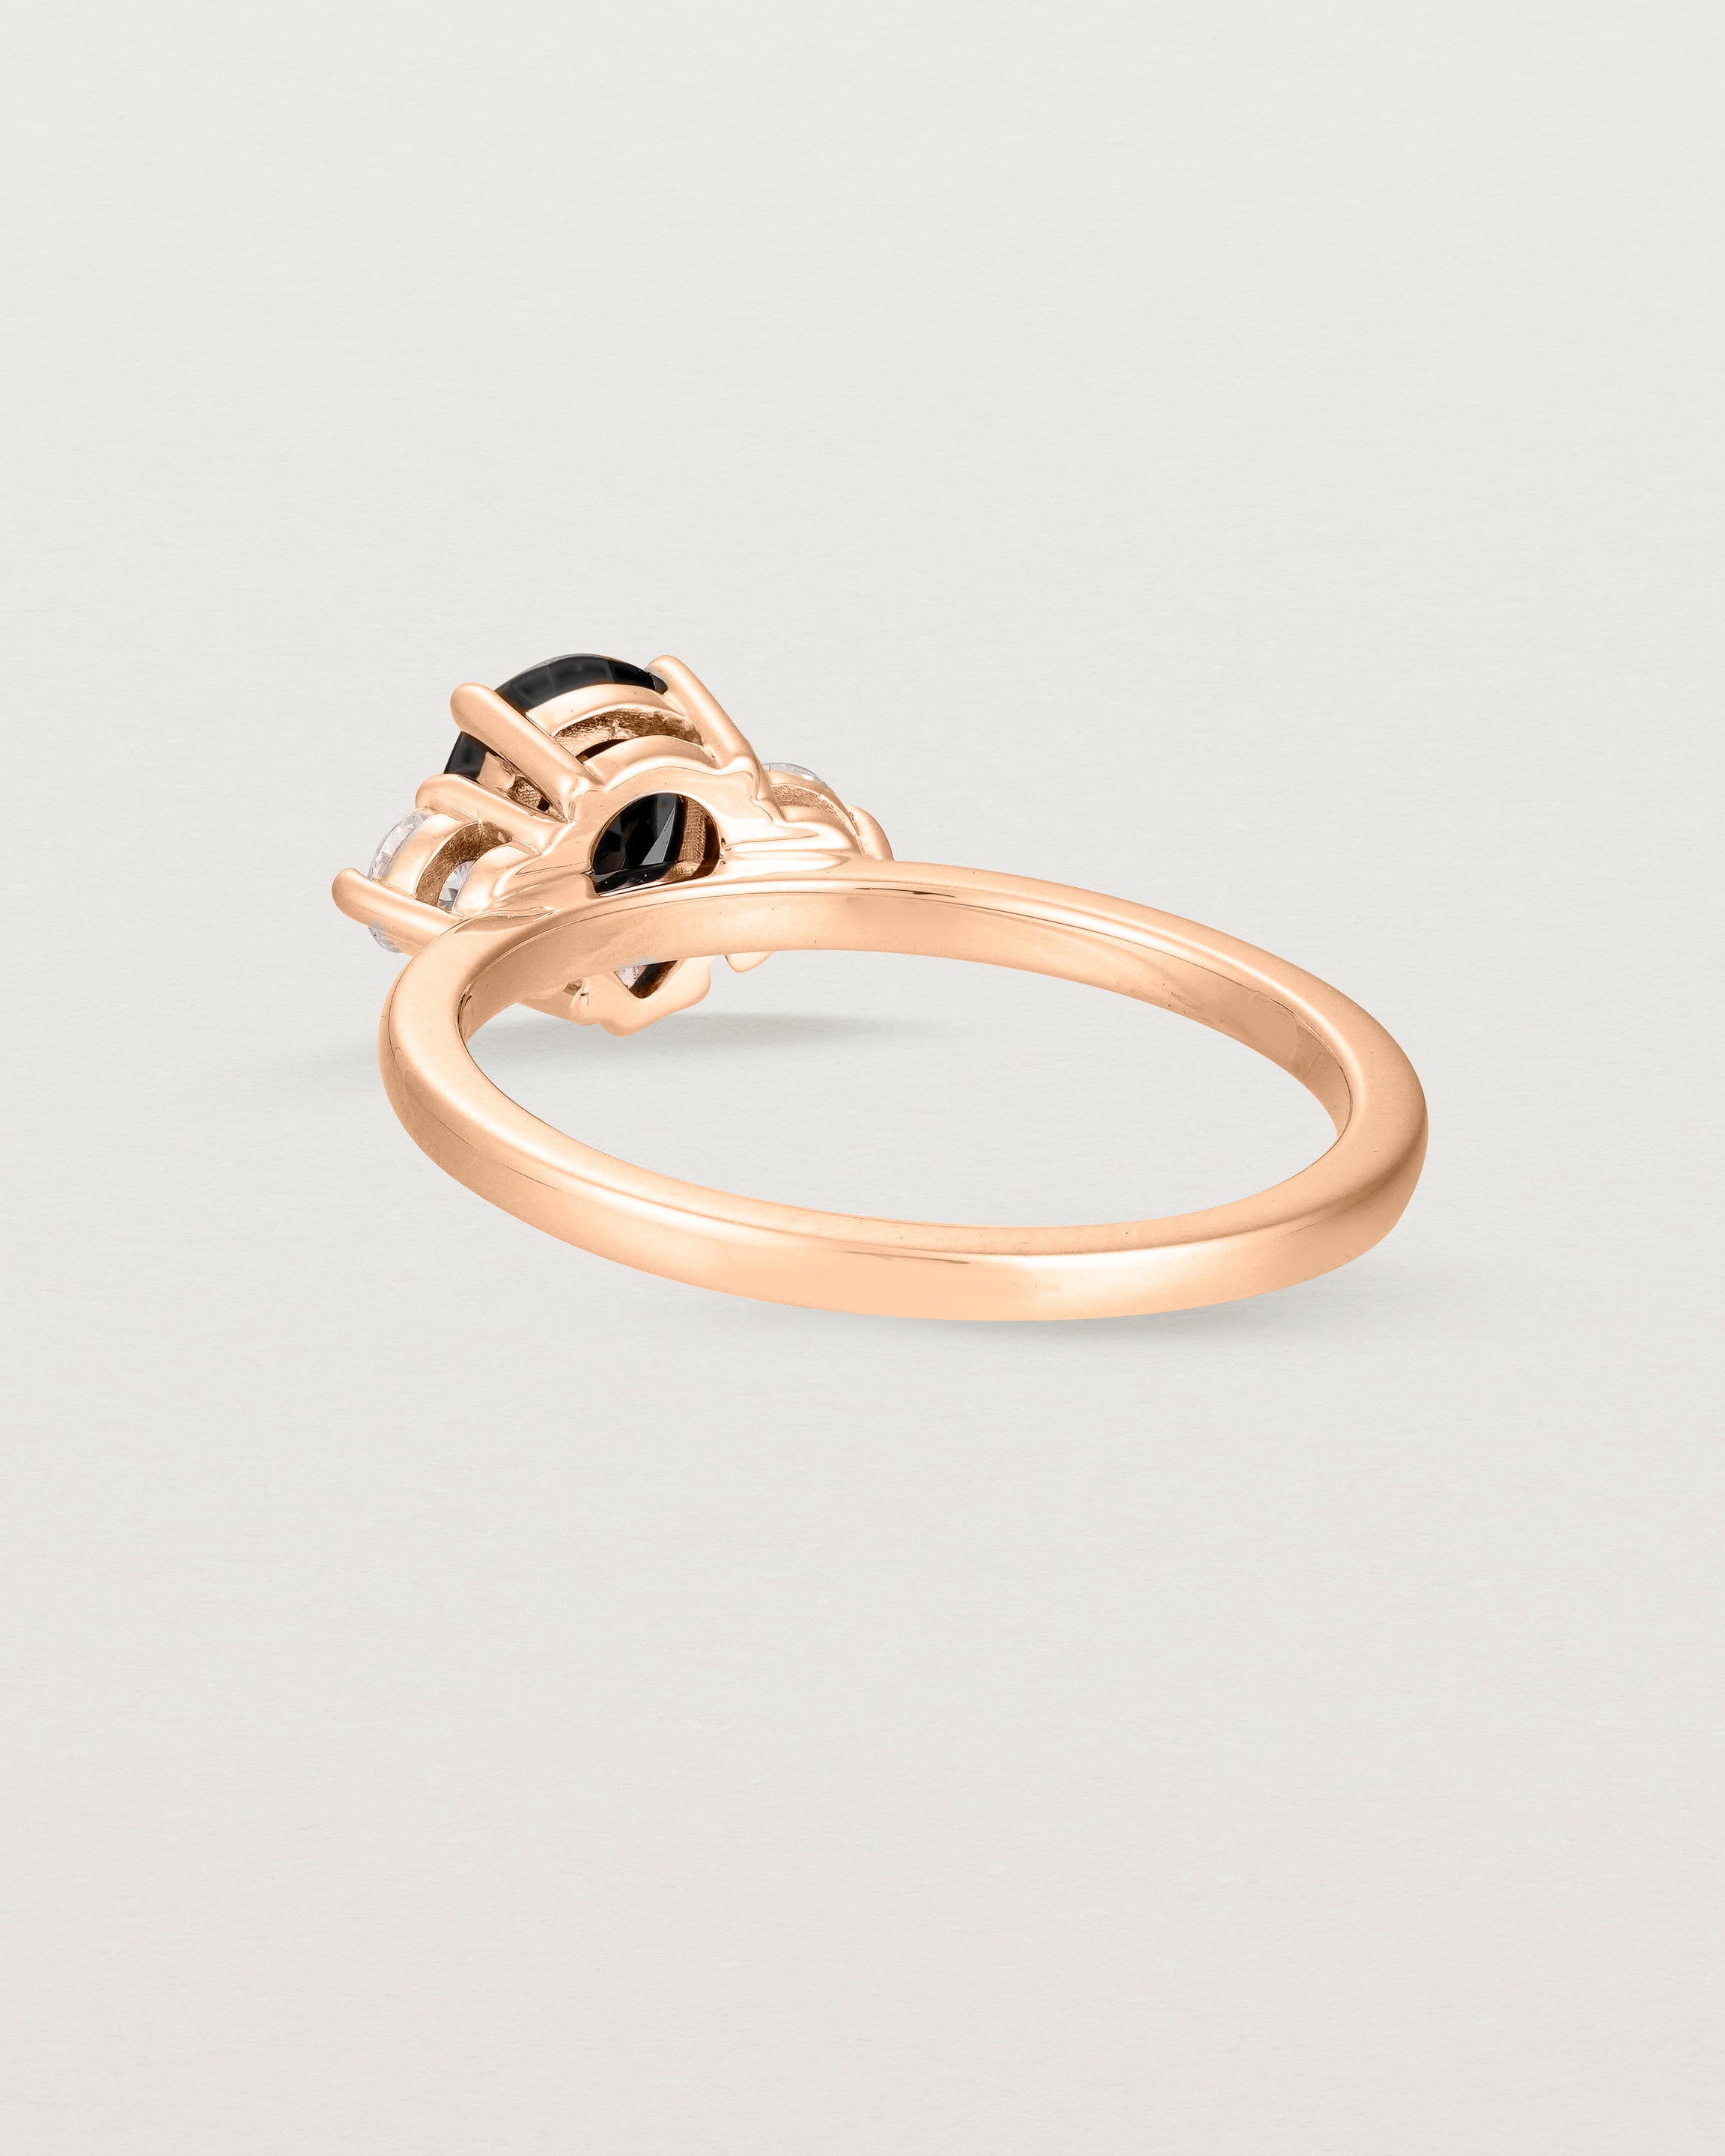 Back view of the Una Pear Trio Ring | Black Spinel & Diamonds | Rose Gold.